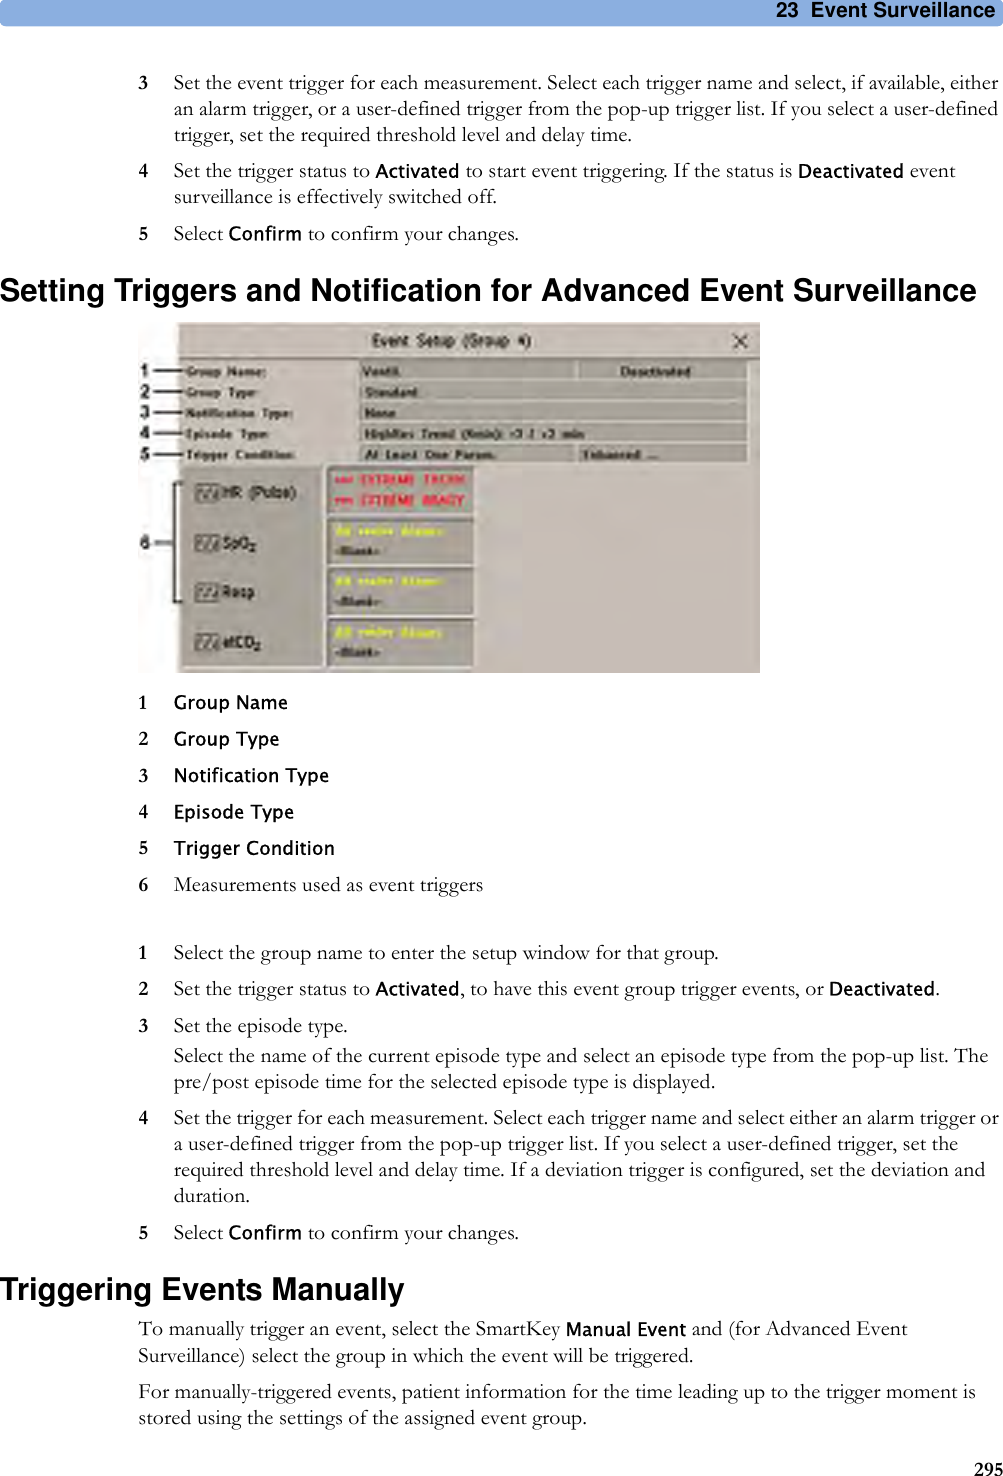 23 Event Surveillance2953Set the event trigger for each measurement. Select each trigger name and select, if available, either an alarm trigger, or a user-defined trigger from the pop-up trigger list. If you select a user-defined trigger, set the required threshold level and delay time.4Set the trigger status to Activated to start event triggering. If the status is Deactivated event surveillance is effectively switched off.5Select Confirm to confirm your changes.Setting Triggers and Notification for Advanced Event Surveillance1Group Name2Group Type3Notification Type4Episode Type5Trigger Condition6Measurements used as event triggers1Select the group name to enter the setup window for that group.2Set the trigger status to Activated, to have this event group trigger events, or Deactivated.3Set the episode type.Select the name of the current episode type and select an episode type from the pop-up list. The pre/post episode time for the selected episode type is displayed.4Set the trigger for each measurement. Select each trigger name and select either an alarm trigger or a user-defined trigger from the pop-up trigger list. If you select a user-defined trigger, set the required threshold level and delay time. If a deviation trigger is configured, set the deviation and duration.5Select Confirm to confirm your changes.Triggering Events ManuallyTo manually trigger an event, select the SmartKey Manual Event and (for Advanced Event Surveillance) select the group in which the event will be triggered.For manually-triggered events, patient information for the time leading up to the trigger moment is stored using the settings of the assigned event group.